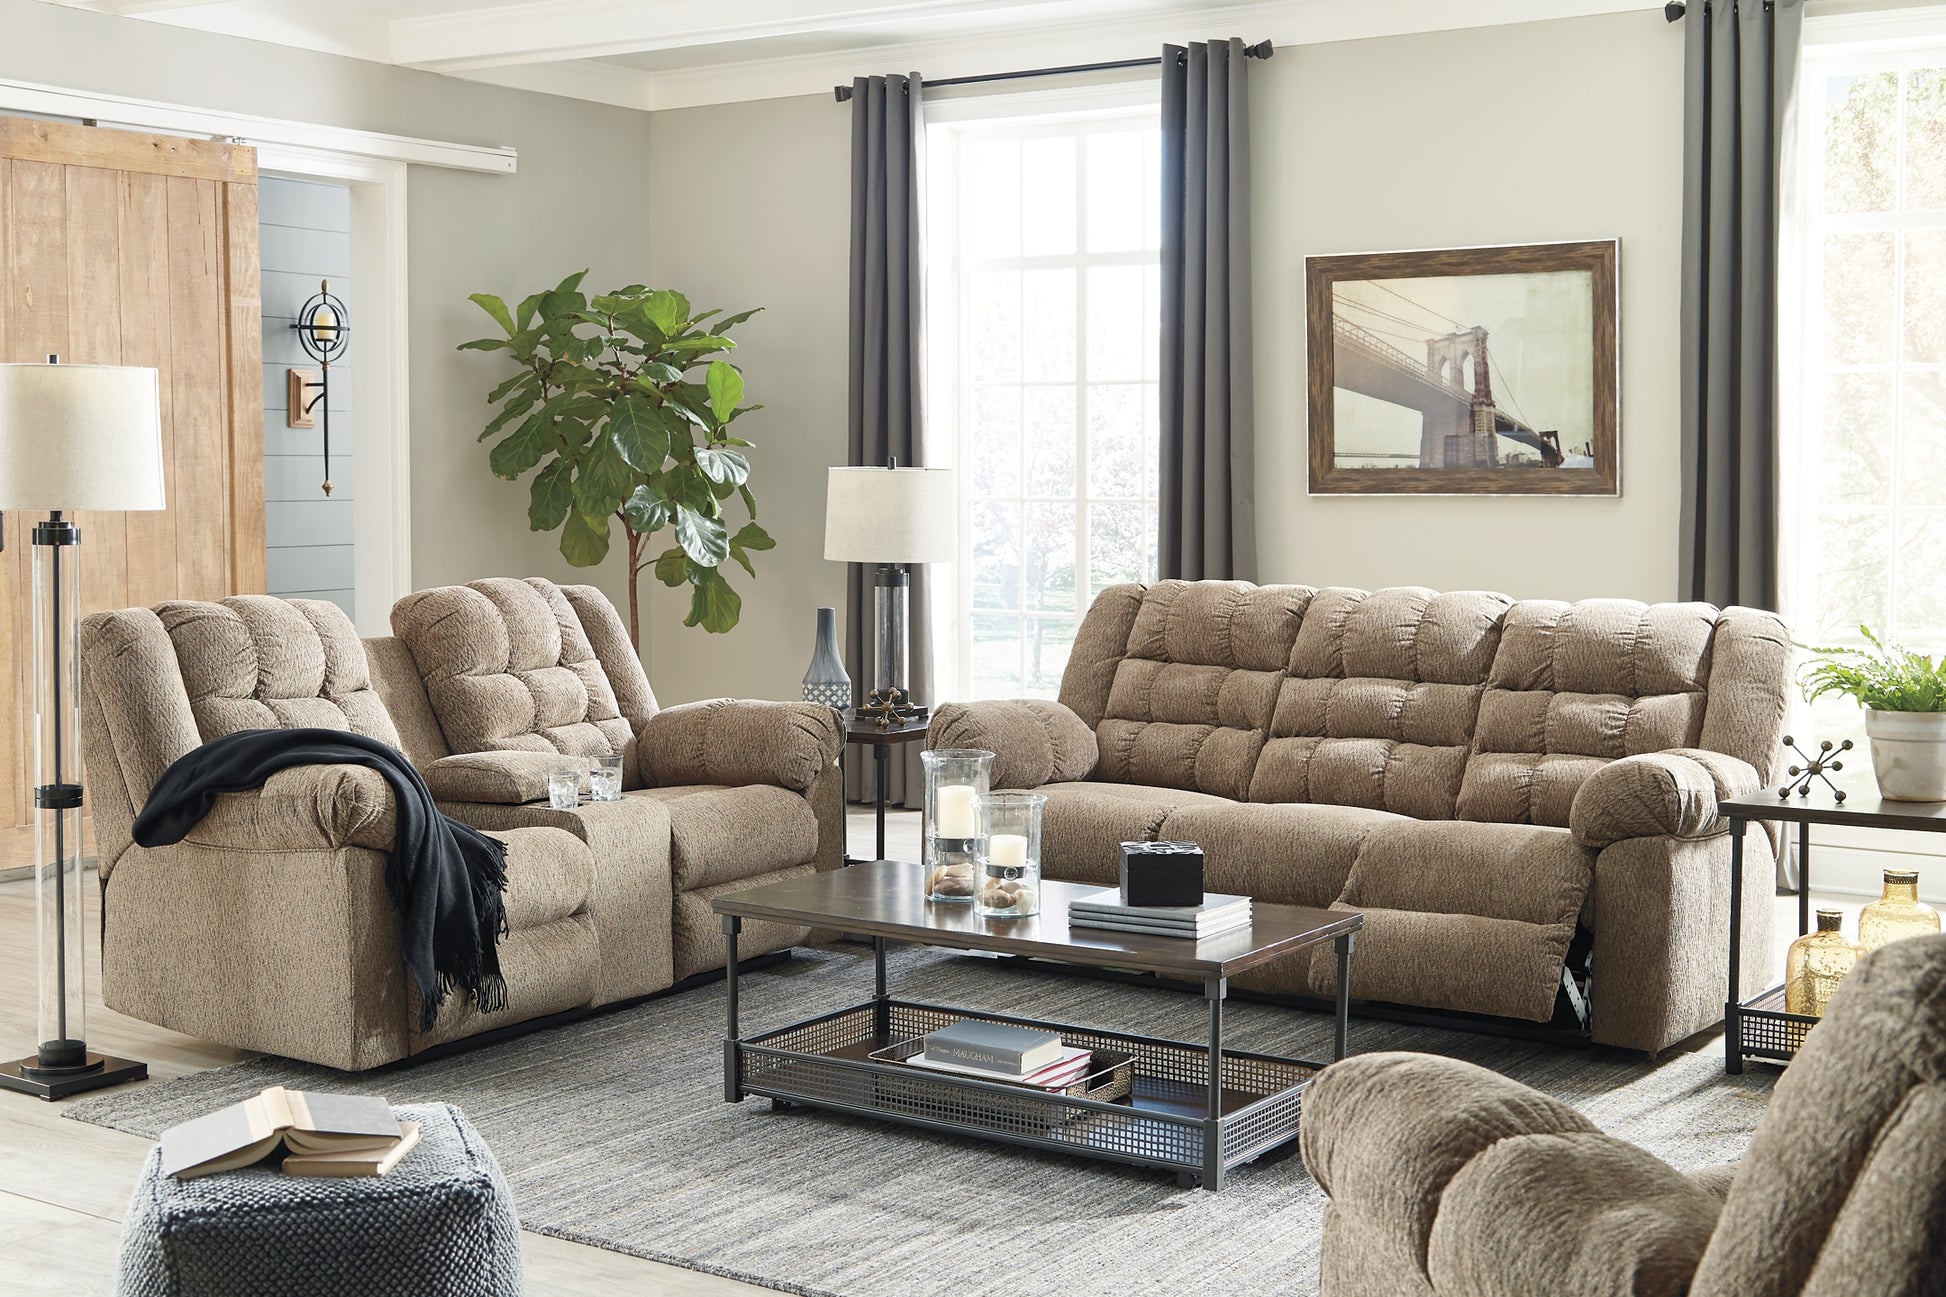 Workhorse DBL Rec Loveseat w/Console Signature Design by Ashley®